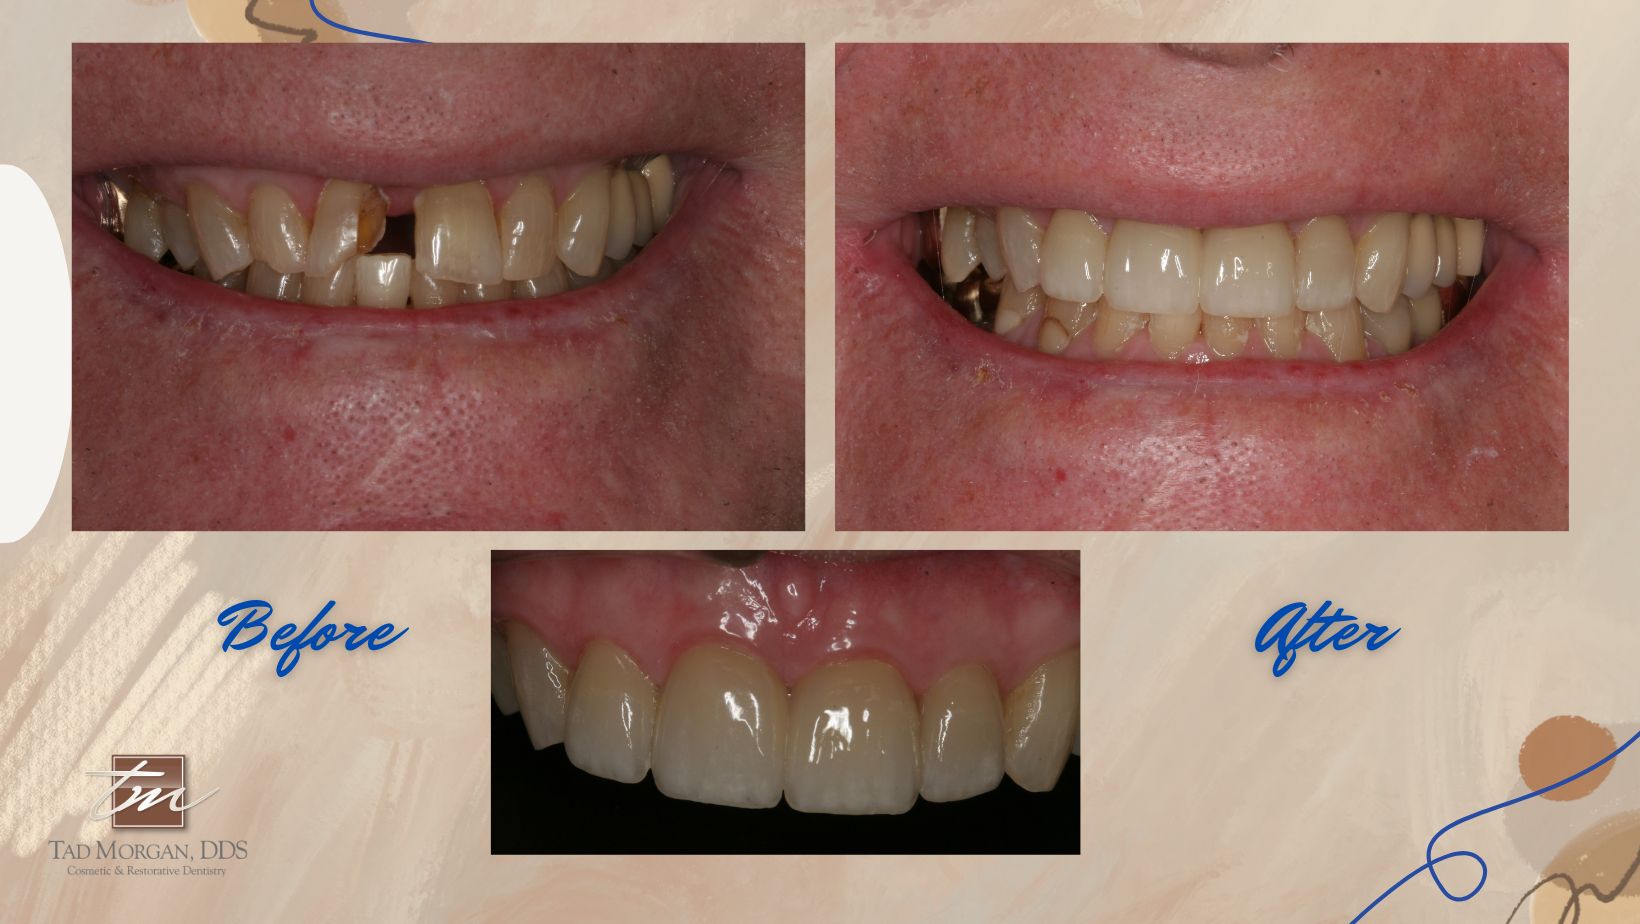 Before and after photos of a patient's teeth.